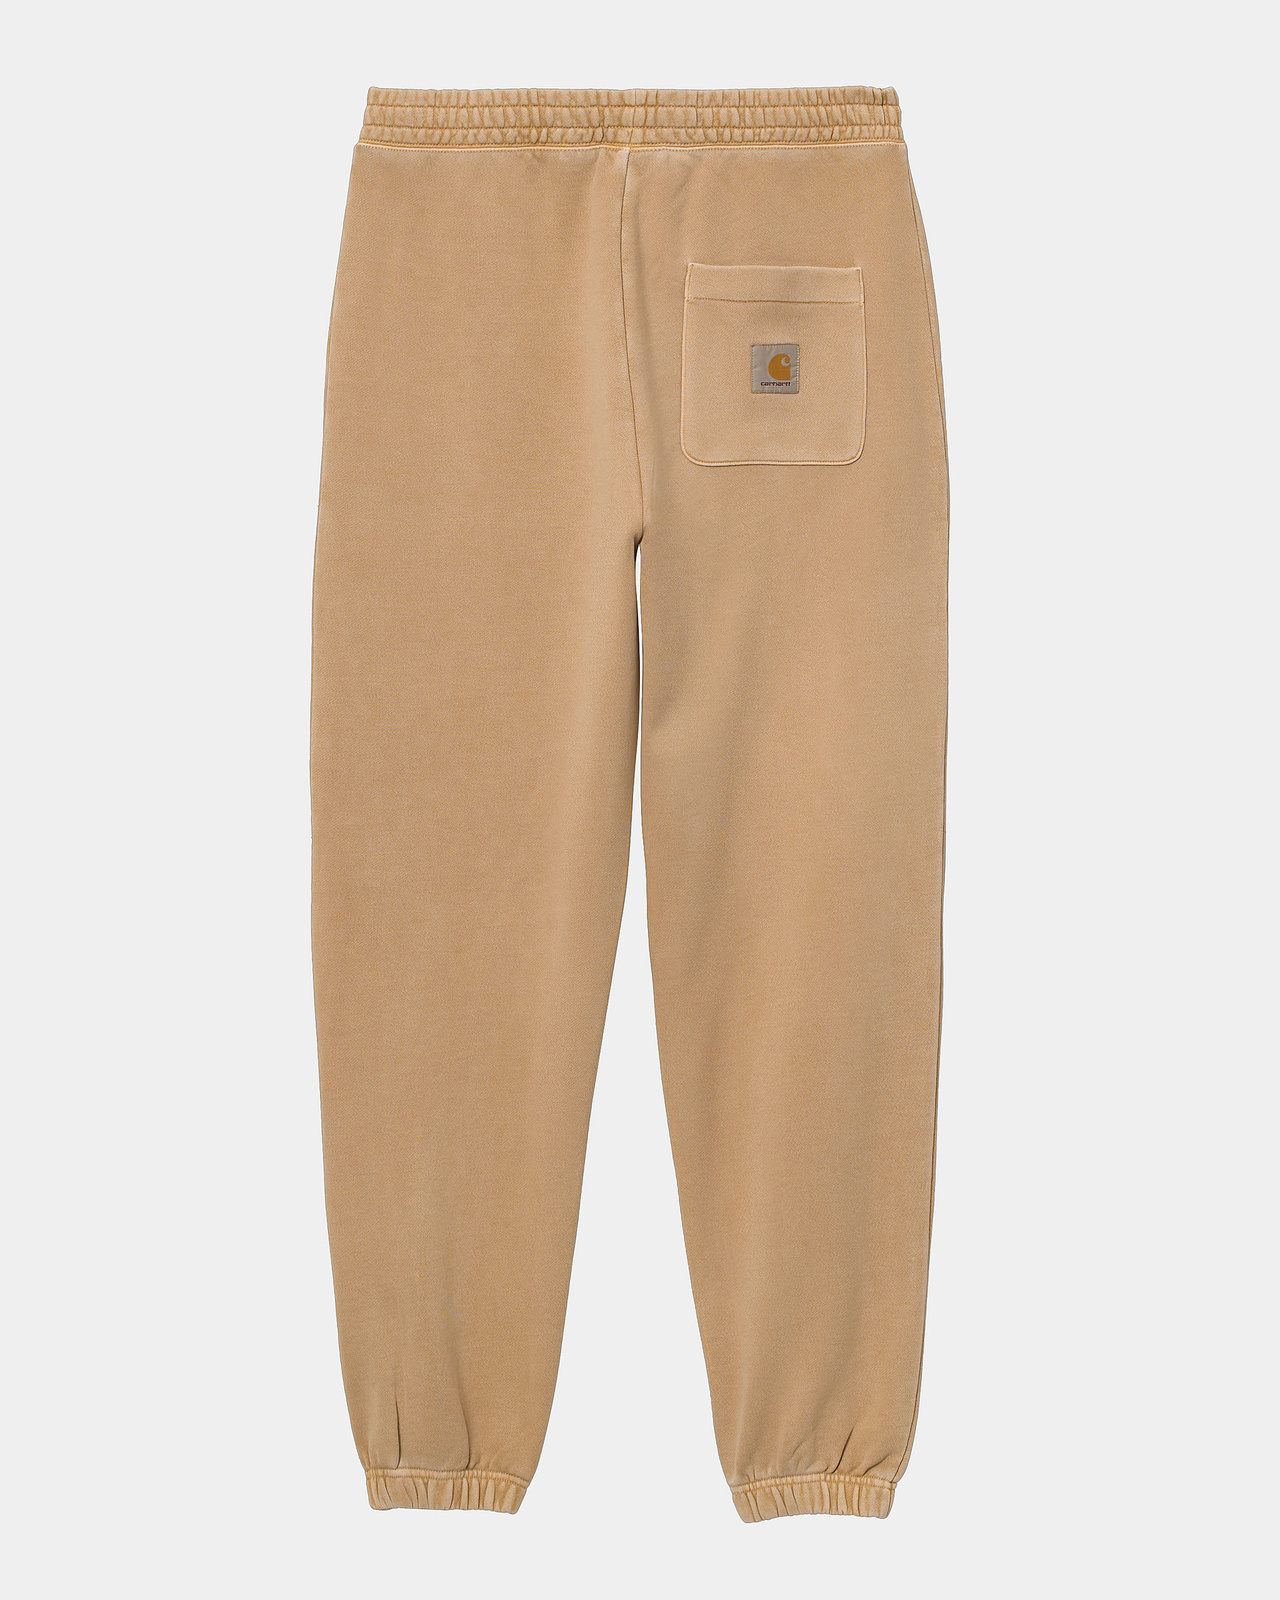 Nelson Sweat Pant - Dusty H Brown - L